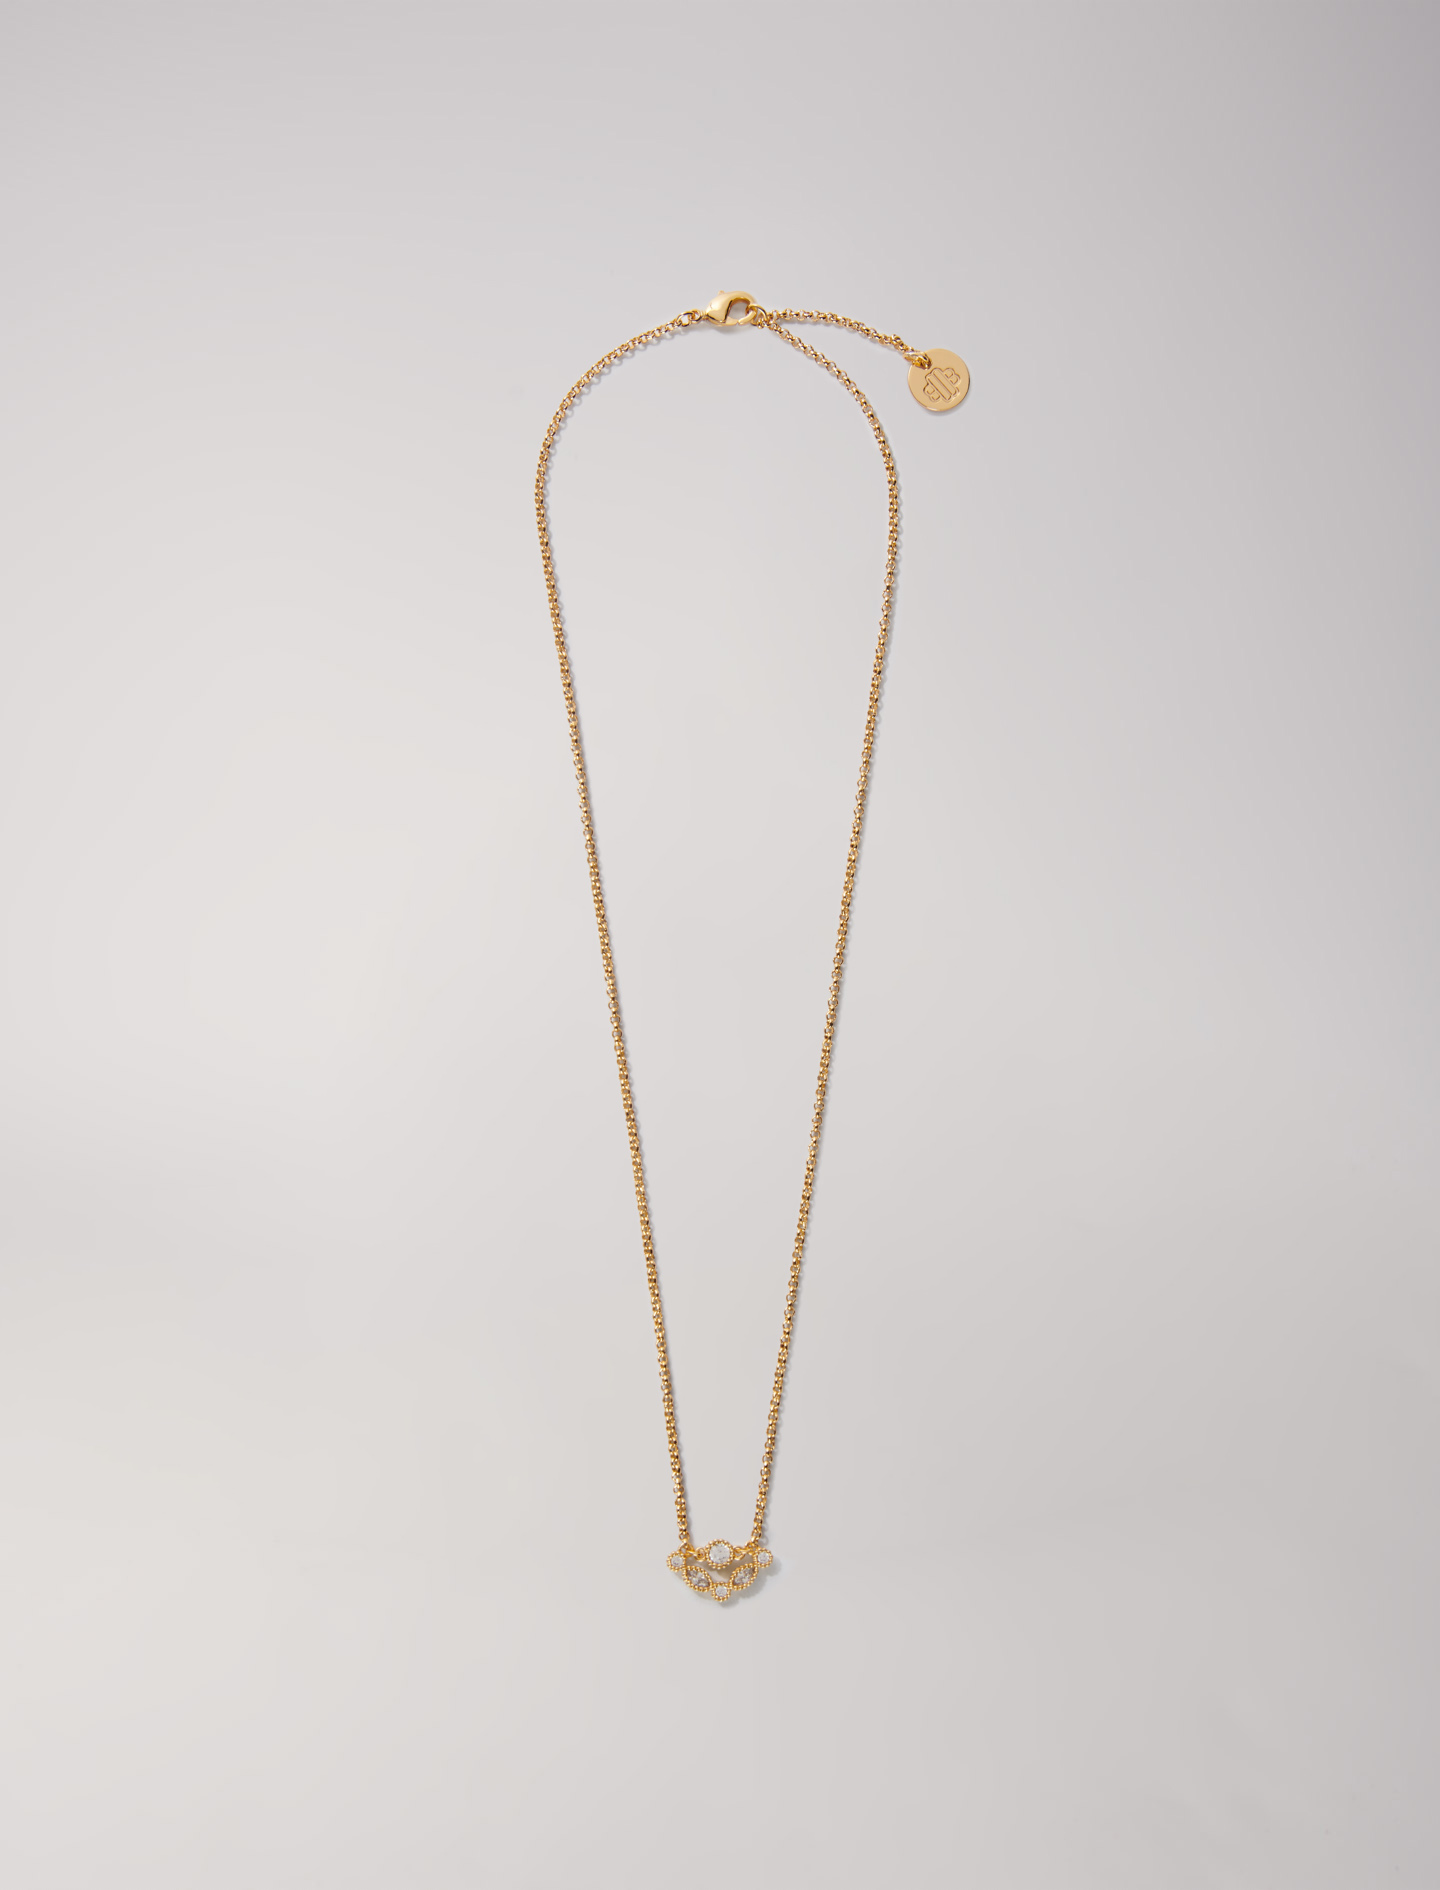 Maje Woman's zirconium oxide Jewellery: Gold-tone necklace with rhinestones, in color Gold / Yellow